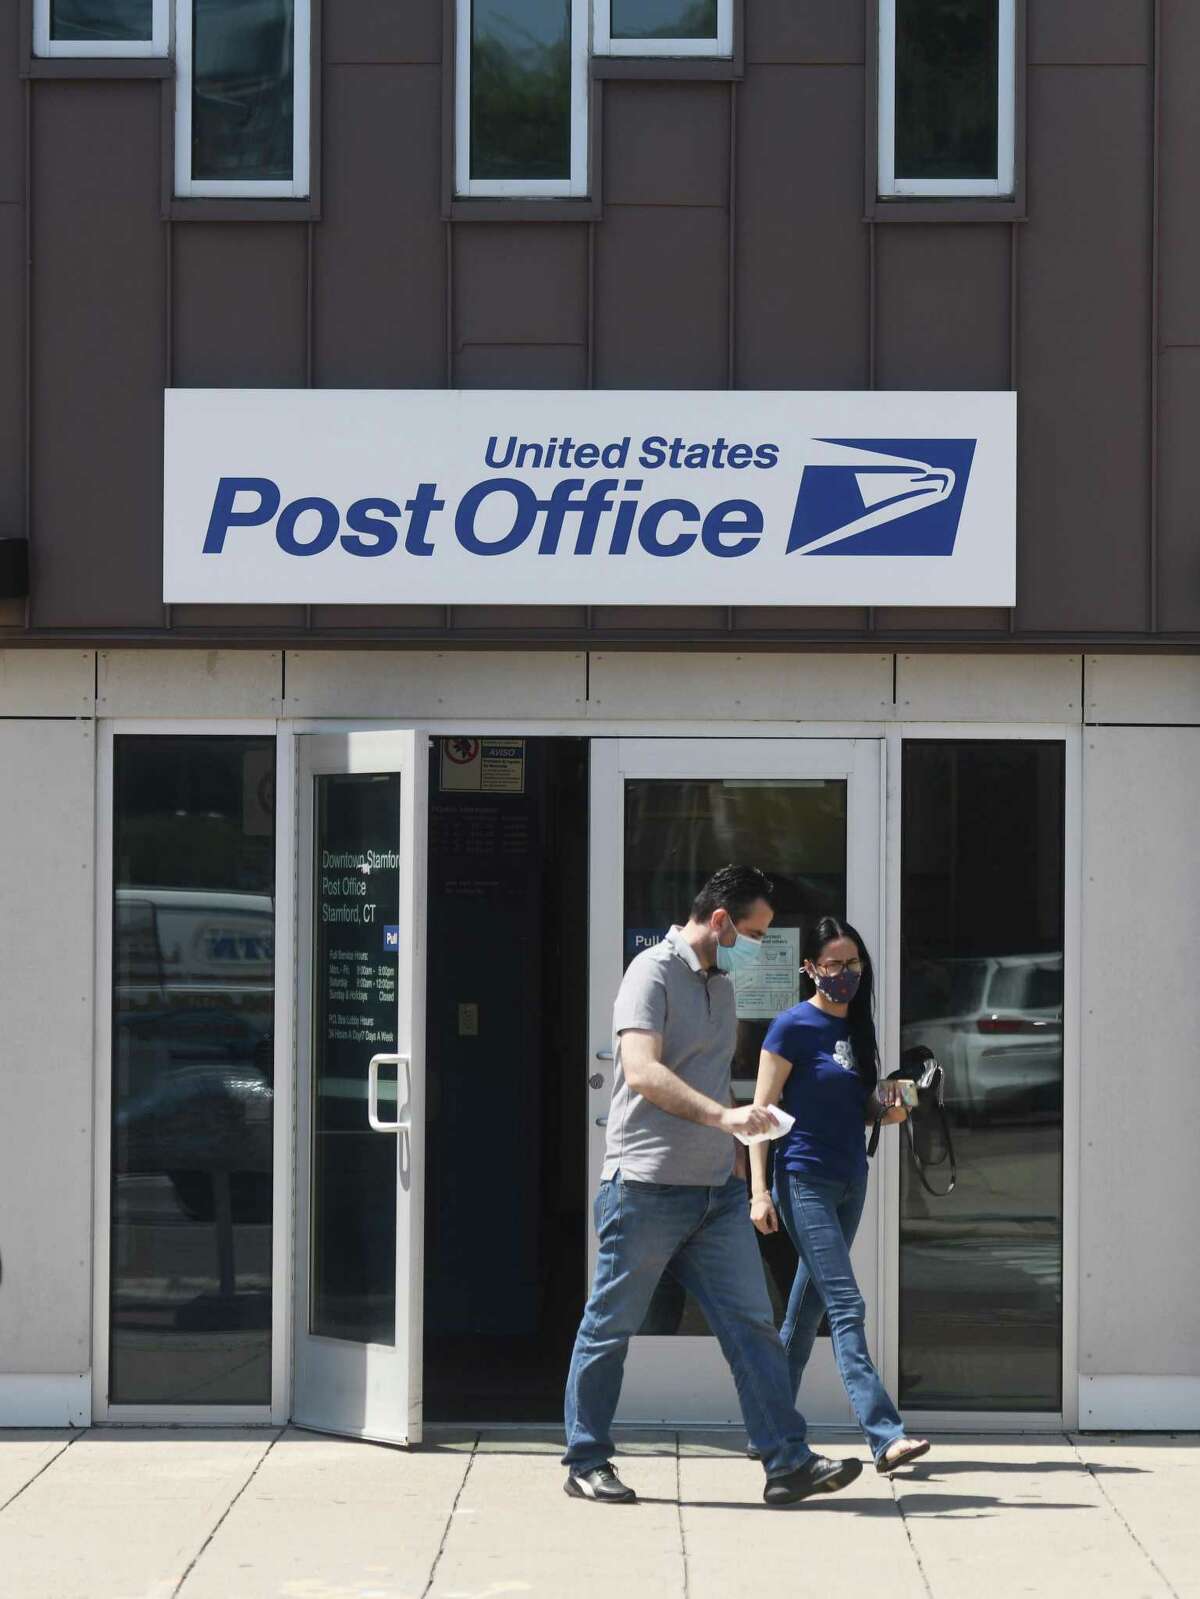 Customers exit the U.S. Post Office on Summer Street in Stamford, Conn. Monday, Aug. 17, 2020. Starting in mid-September, the Secretary of the State will mail absentee ballot applications to all registered voters in Connecticut. Those who wish to vote by mail on Nov. 3 must fill out and return the application. Once applications are verified, voters will be mailed ballots beginning Oct. 2. If you prefer, you may send in an application now. This is the link for downloading an application. By Connecticut law, the secretary of the state cannot begin sending absentee ballots to voters until Oct. 2. Voters should fill them out and mail them to the town clerk as quickly as possible. (Unlike ballot applications, ballots cannot be downloaded.) Absentee ballot applications and ballots also may be placed in one of two official drop boxes. One box is in the parking garage of the Stamford Government Center, 888 Washington Blvd., near the lobby doors. The other is in front of Ferguson Library’s Harry Bennett Branch, 115 Vine Road.